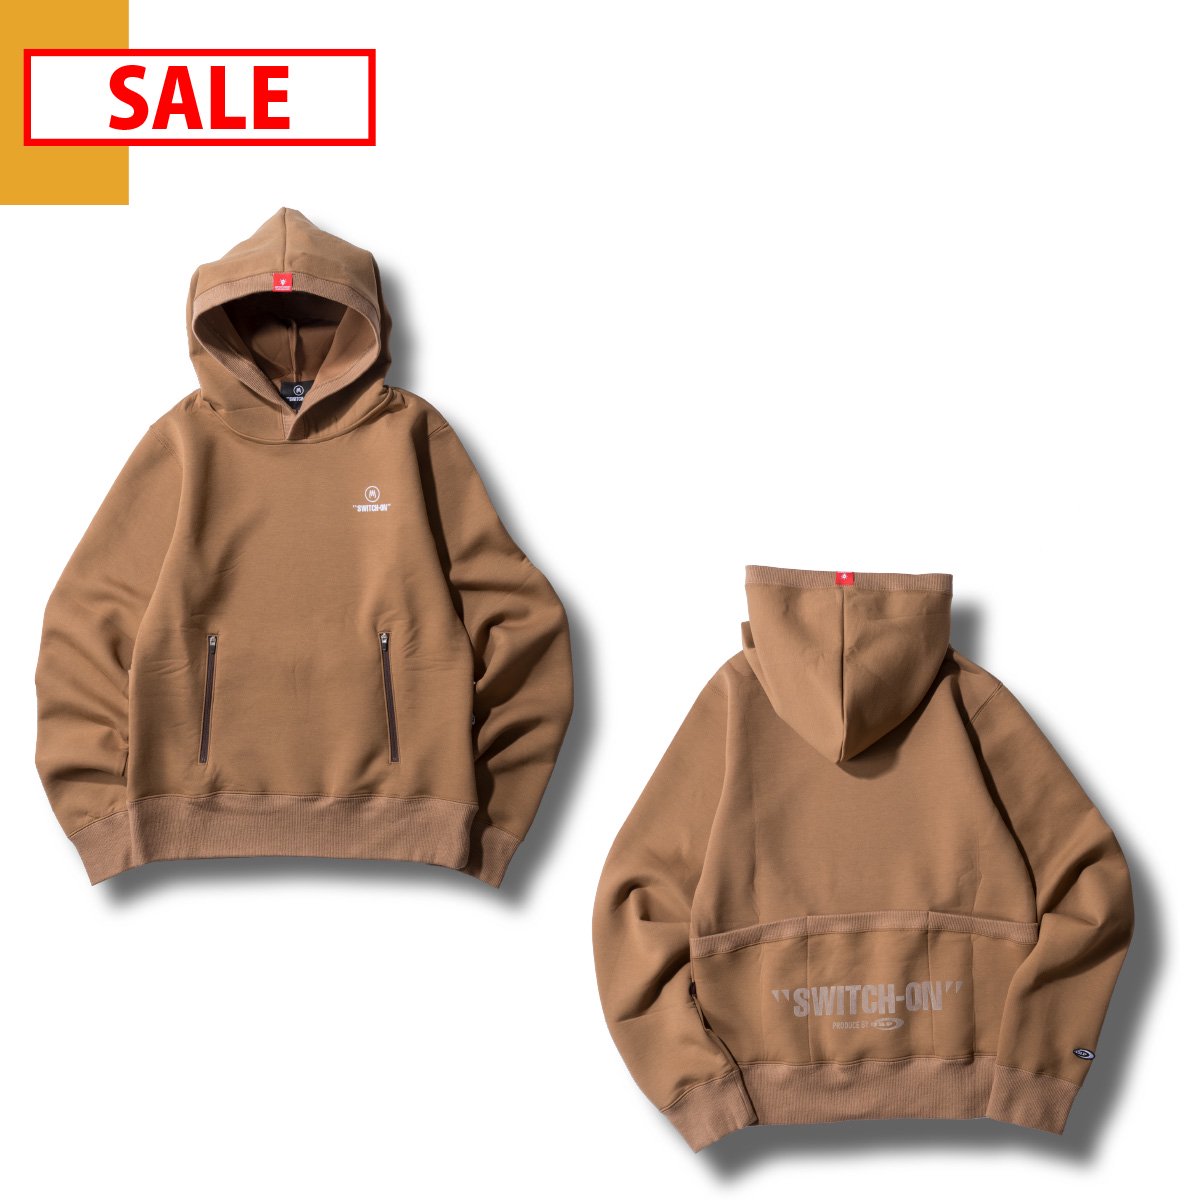 EZ stretch hoodie<img class='new_mark_img2' src='https://img.shop-pro.jp/img/new/icons23.gif' style='border:none;display:inline;margin:0px;padding:0px;width:auto;' />